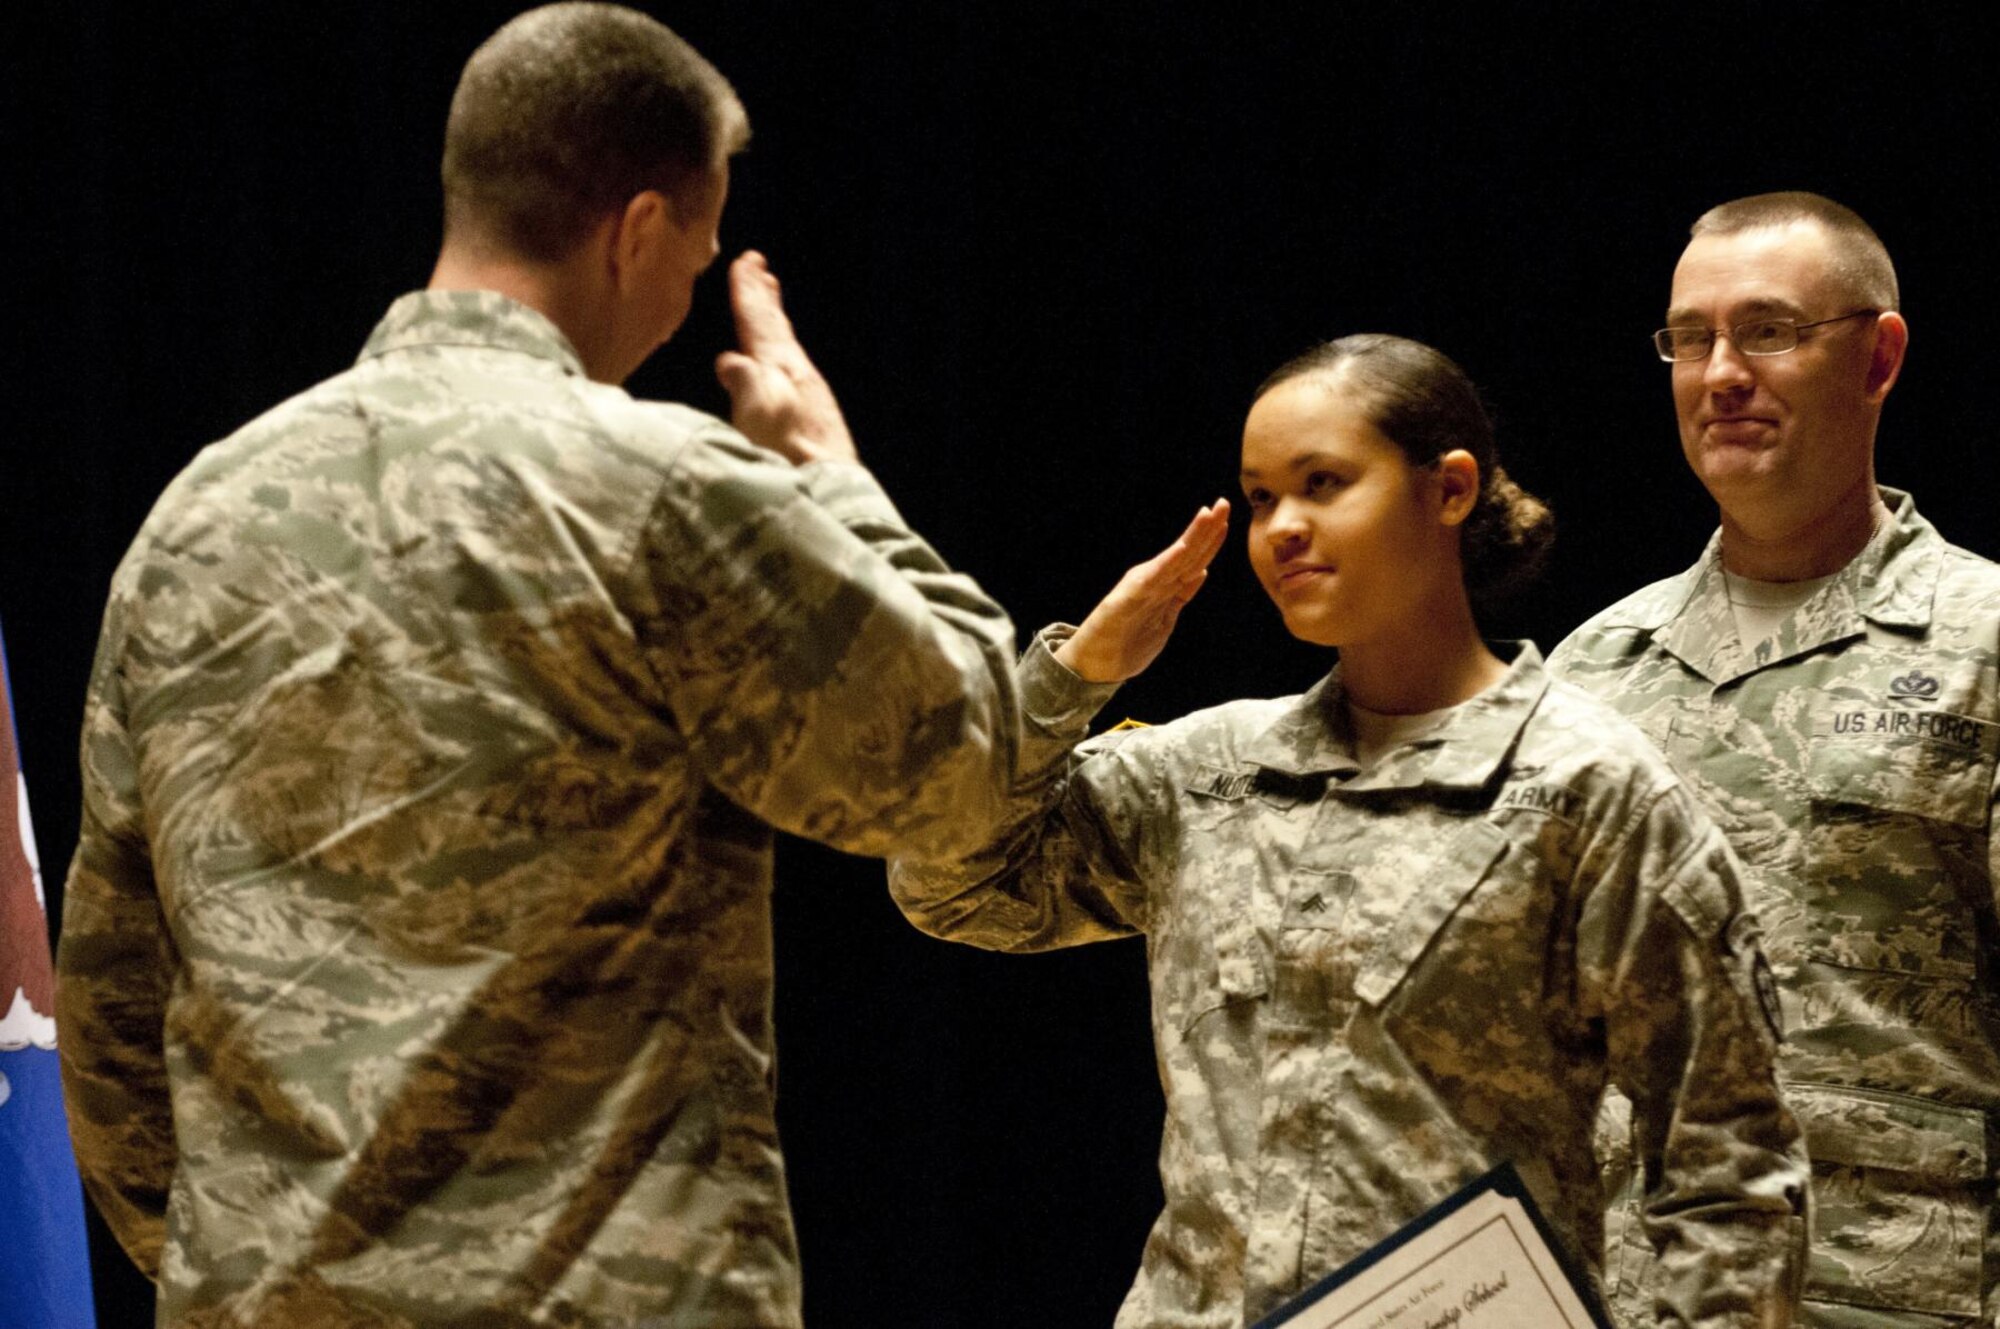 U.S. Army Cpl. Janay Nutter salutes Col. Brian Bruckbauer, the commander of 673rd Air Base Wing, during the Airman Leadership Course class 15-1 graduation in the post theater Dec. 18, 2014, at Joint Base Elmendorf-Richardson, Alaska. Nutter is a radio retransmission squad leader with 2nd Platoon, C. Company, 6th Brigade Engineer Battalion, 4th Infantry Brigade Combat Team (Airborne), 25th Infantry Division. (U.S. Army photo/Staff Sgt. Daniel Love)